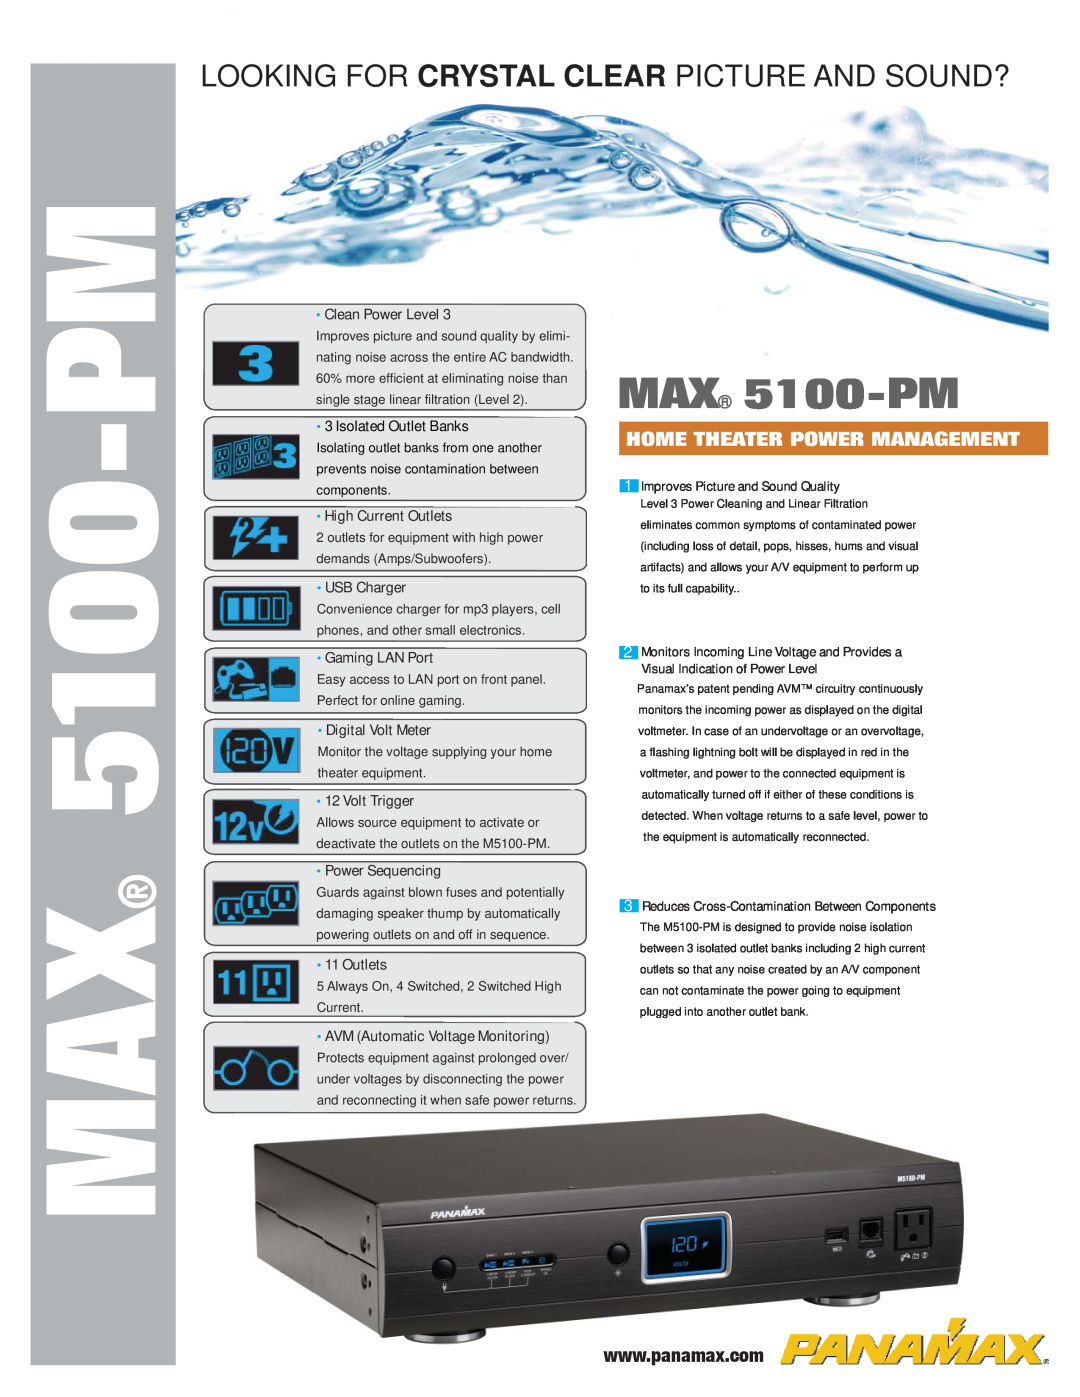 Panamax MAX 5100-PM manual Looking For Crystal Clear Picture And Sound?, Home Theater Power Management, Clean Power Level 